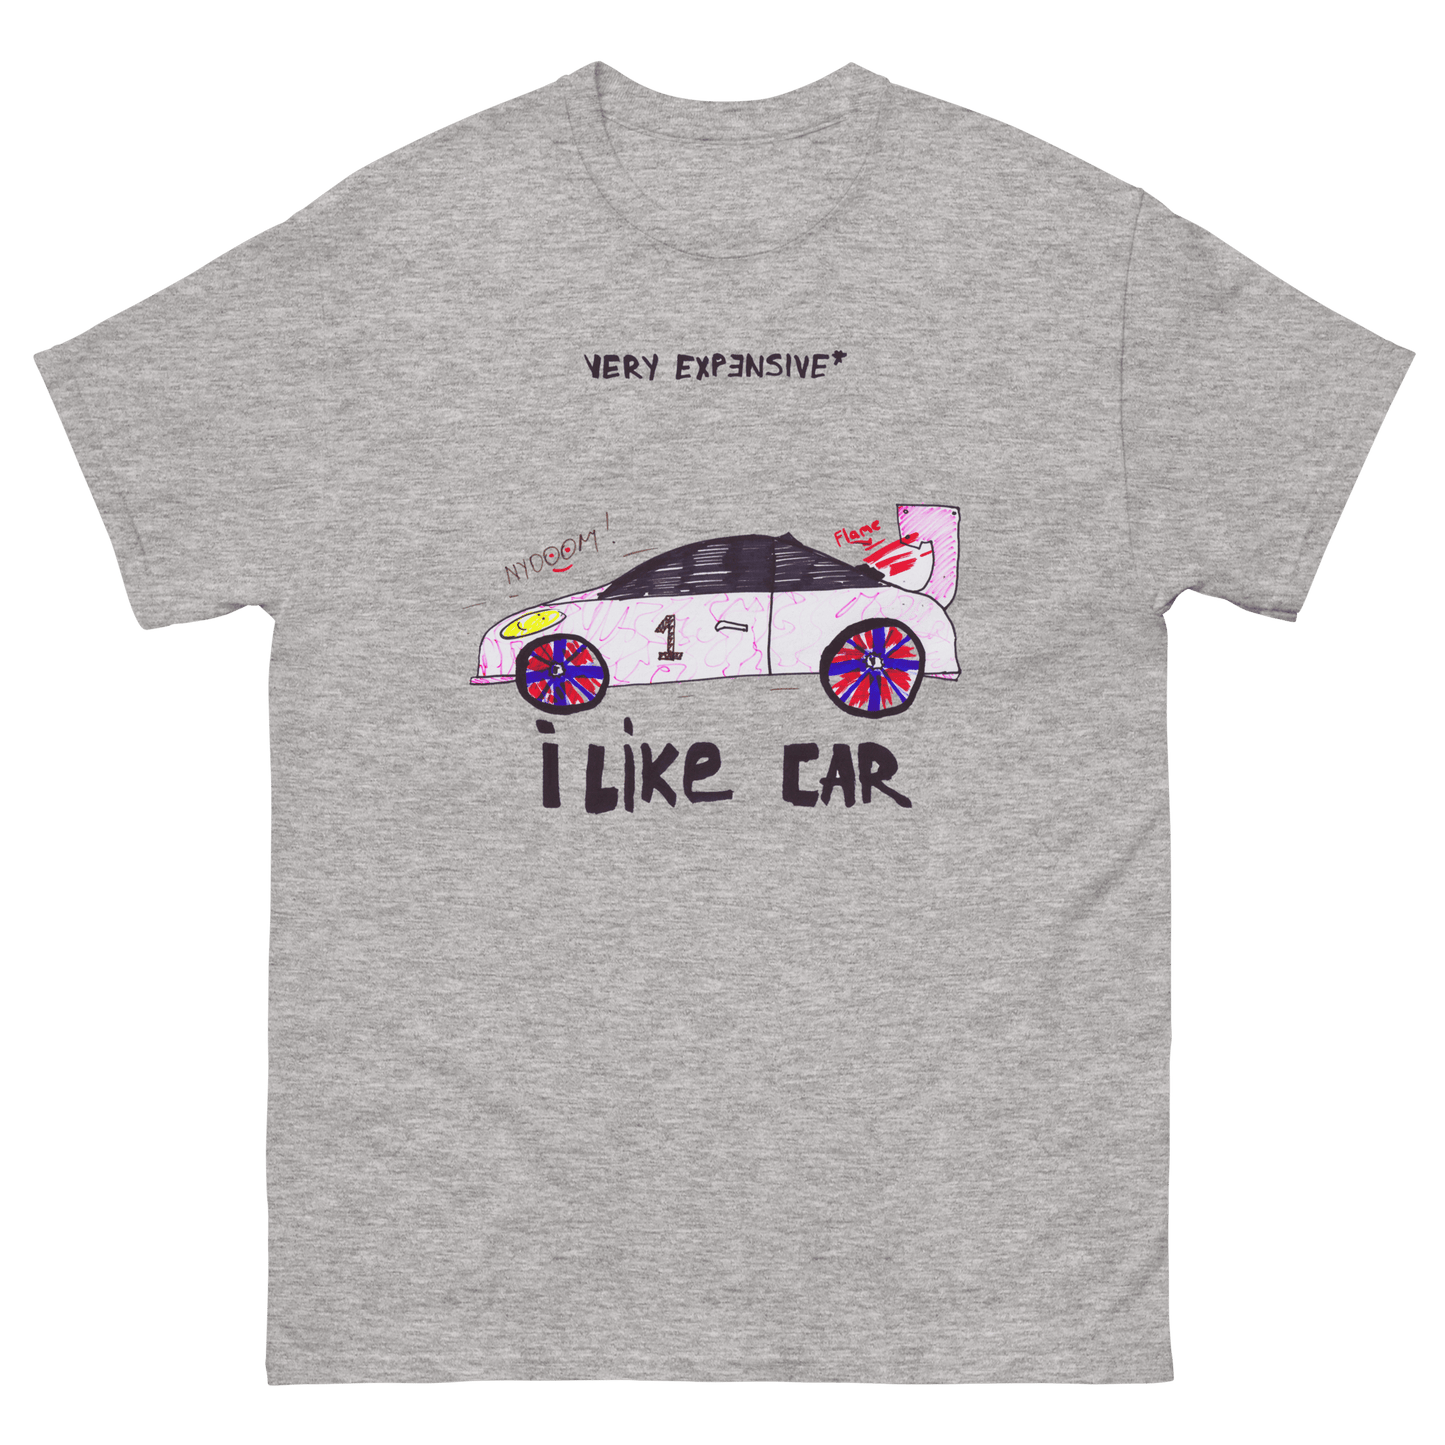 Childish Car Drawing T-shirt Design I Like Car / Very Expensive* - Very Expensive*